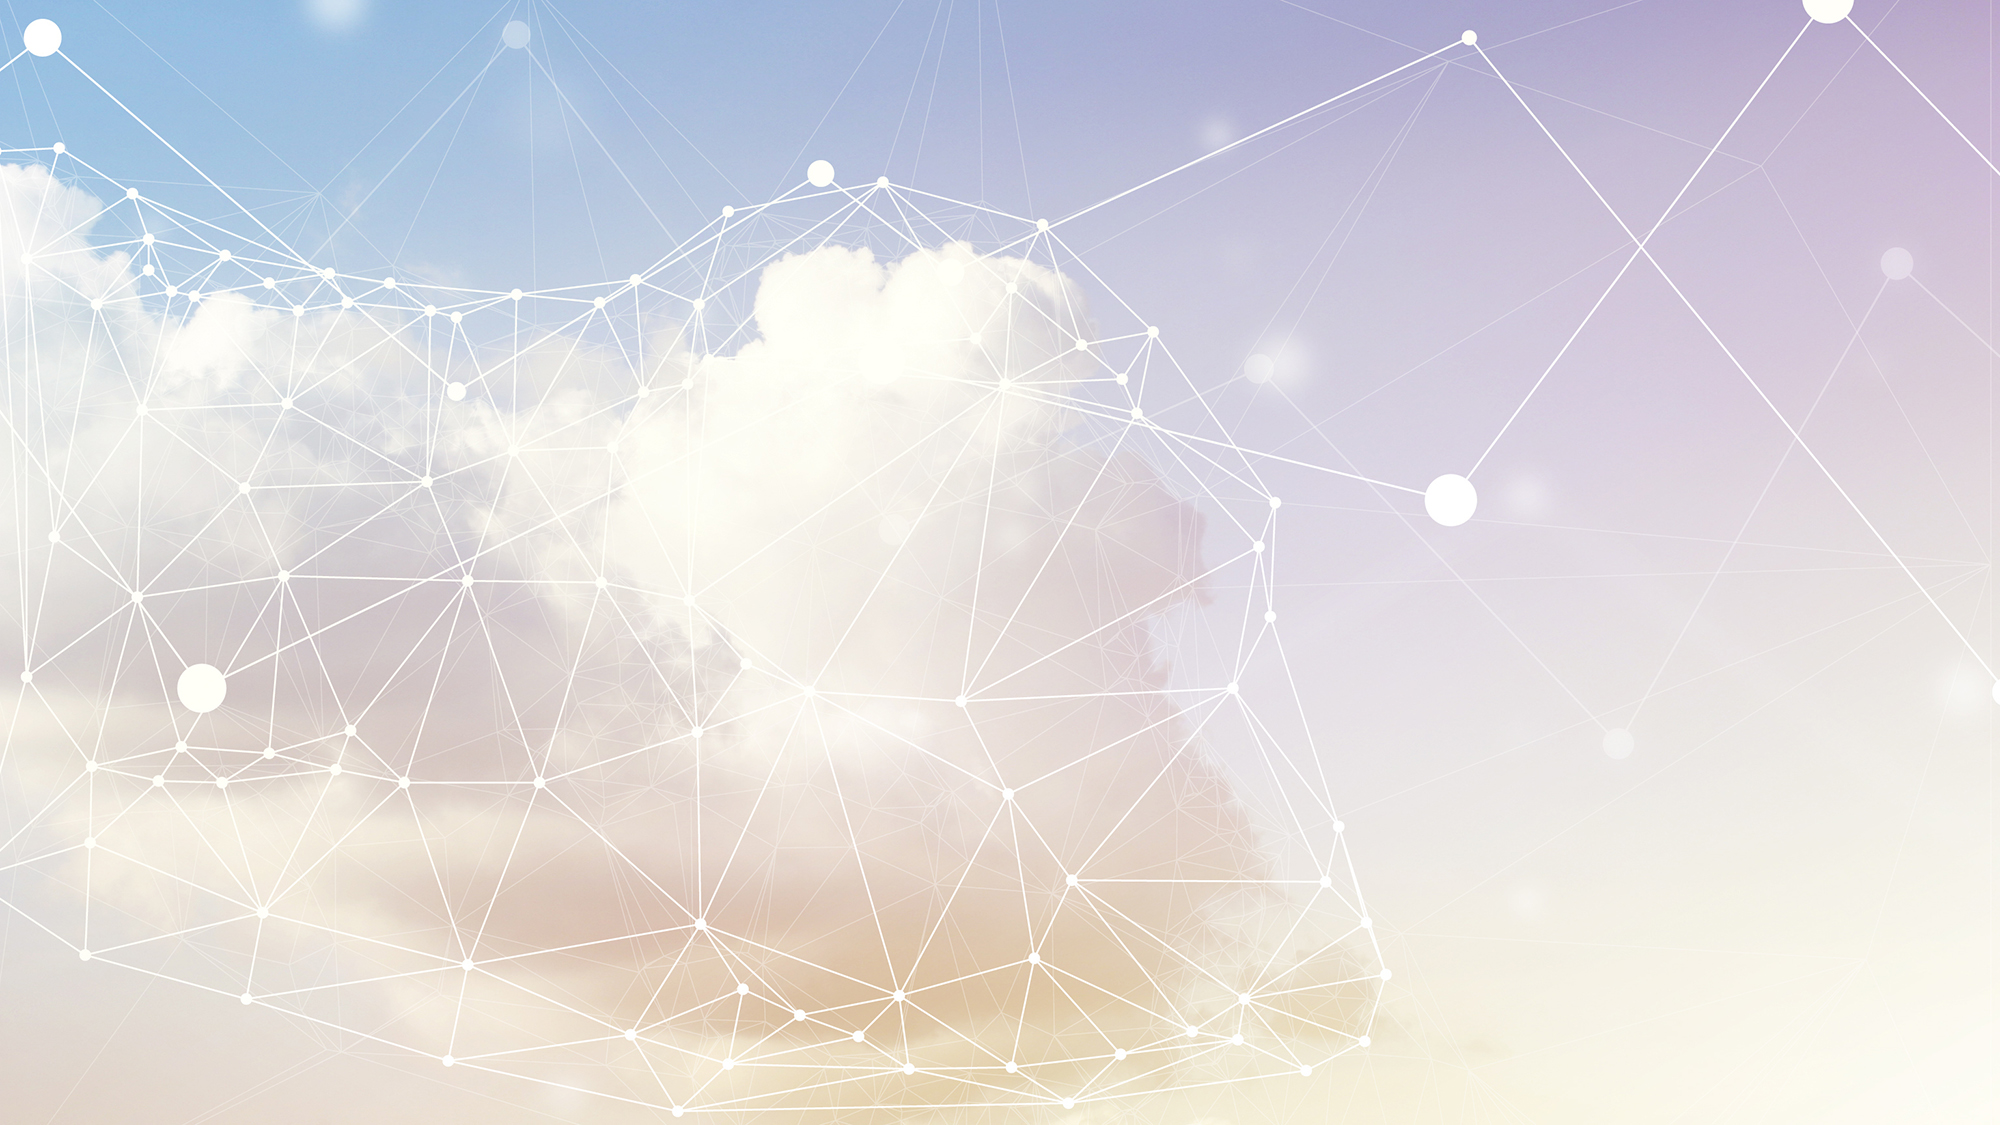 With Cloud Computing, the Sky’s The Limit